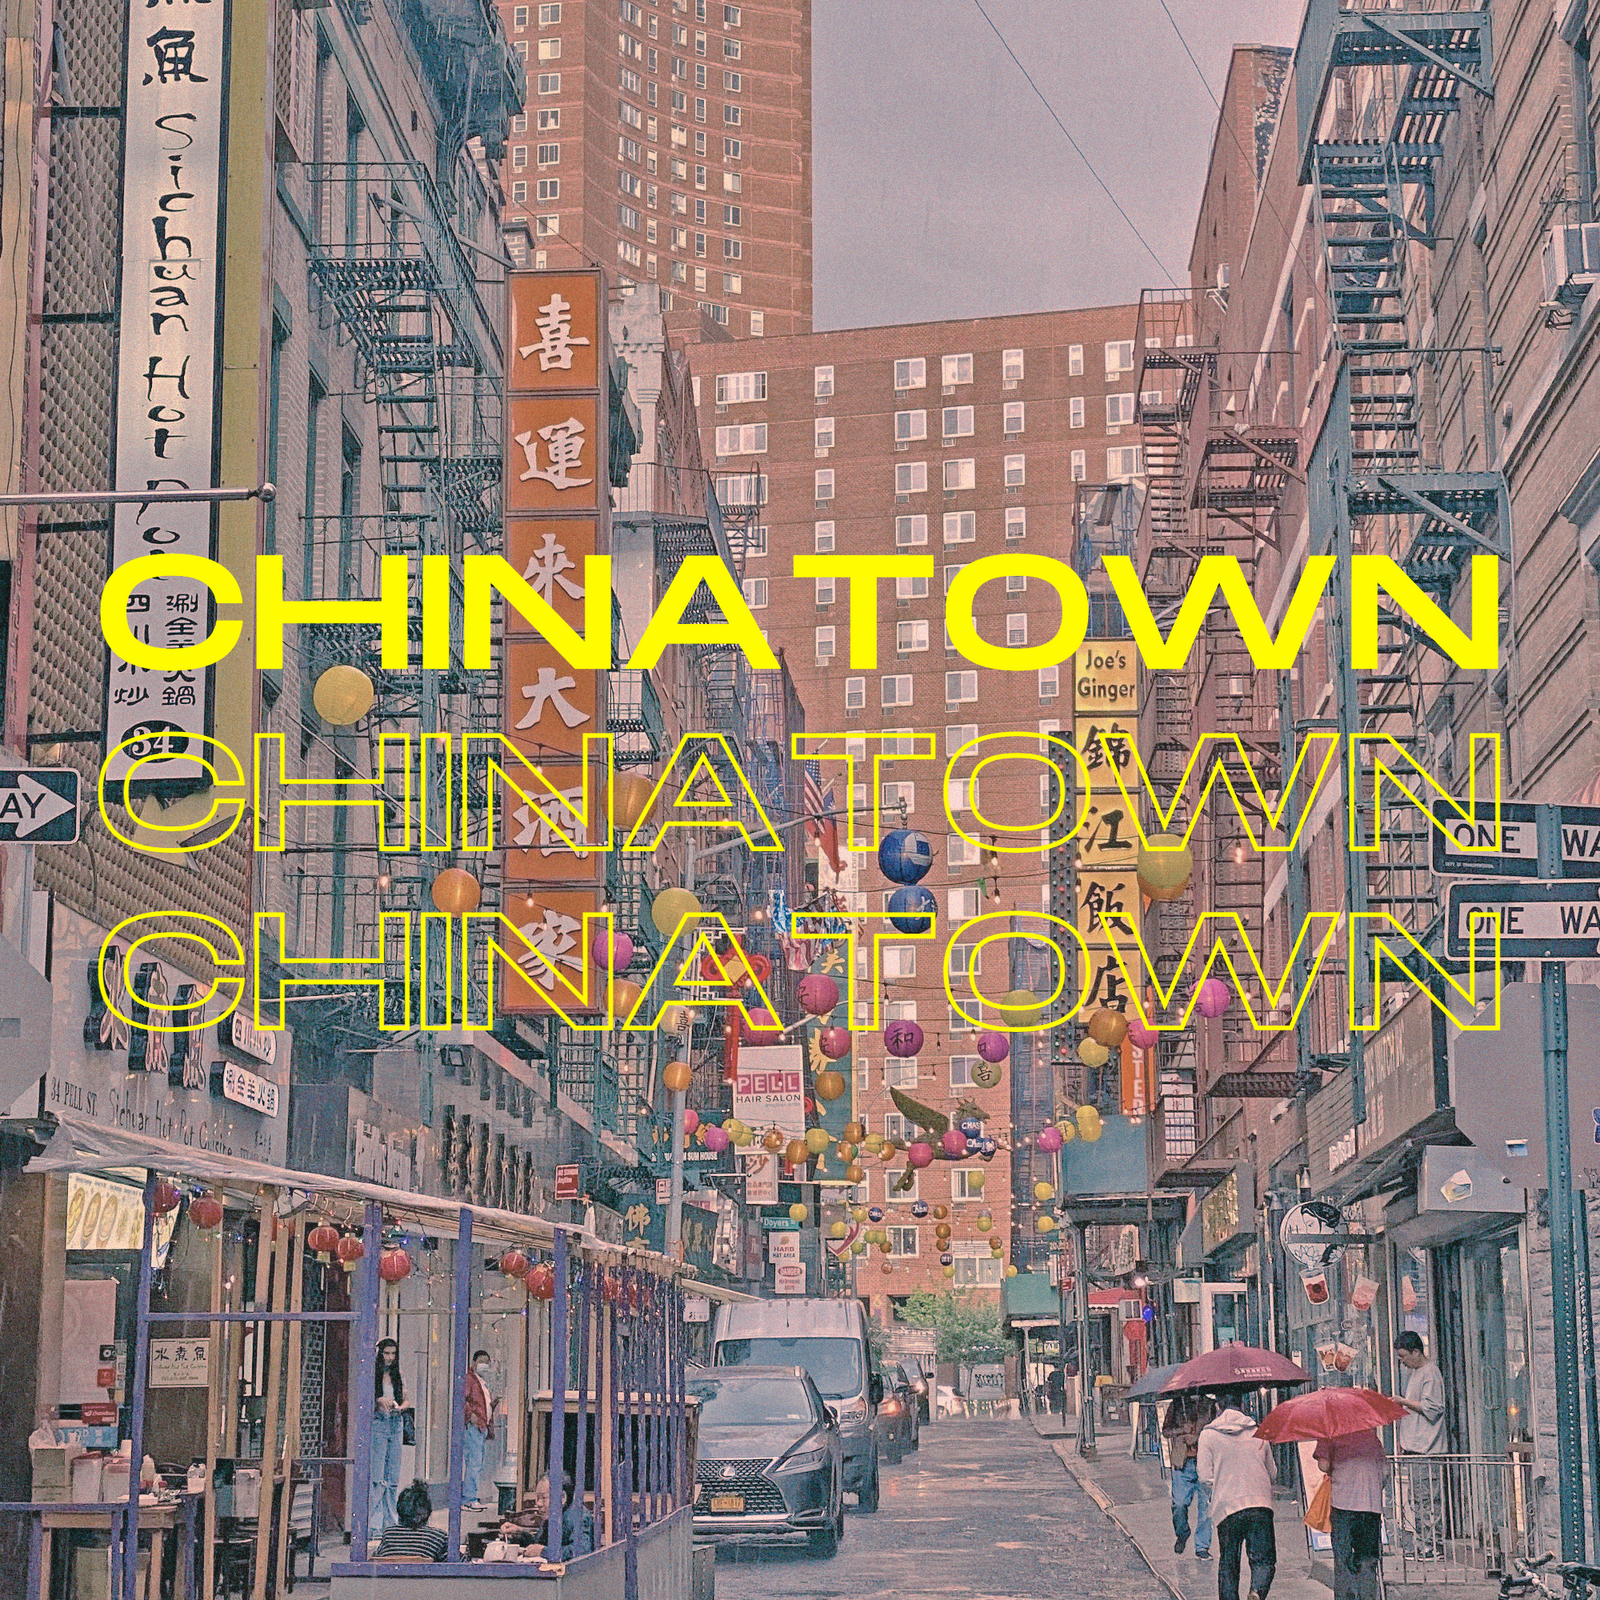 NYC's Chinatown: one of my many homes